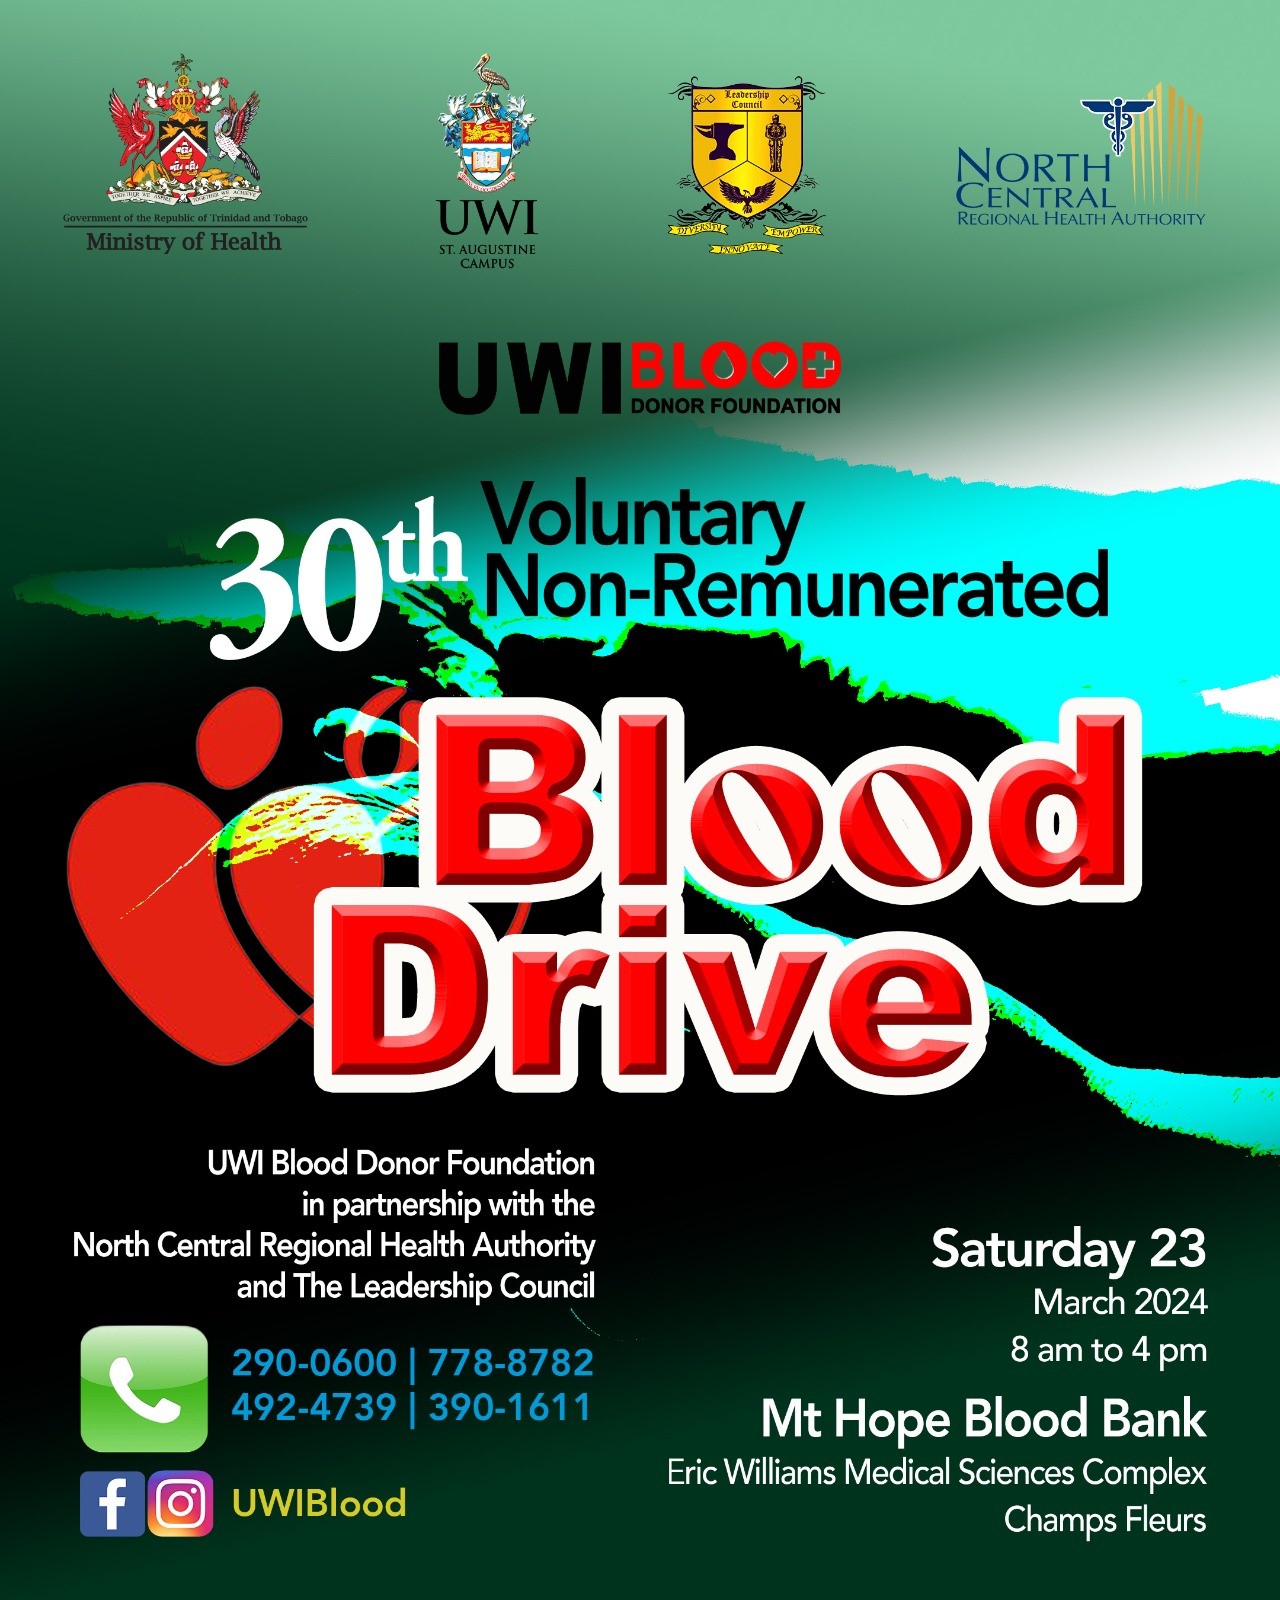 Be The Heartbeat of Hope at the 30th UWI Blood Drive!